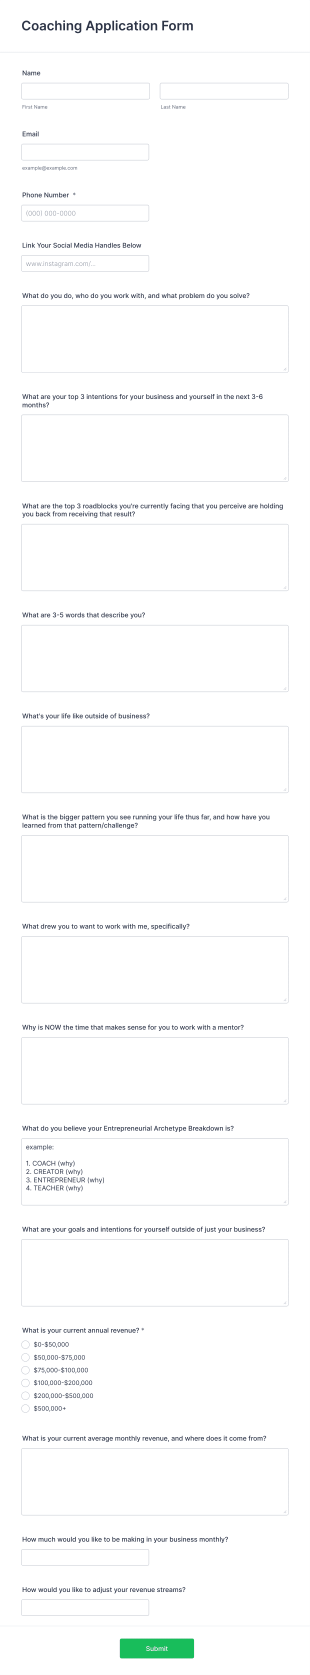 Coaching Application Form Template